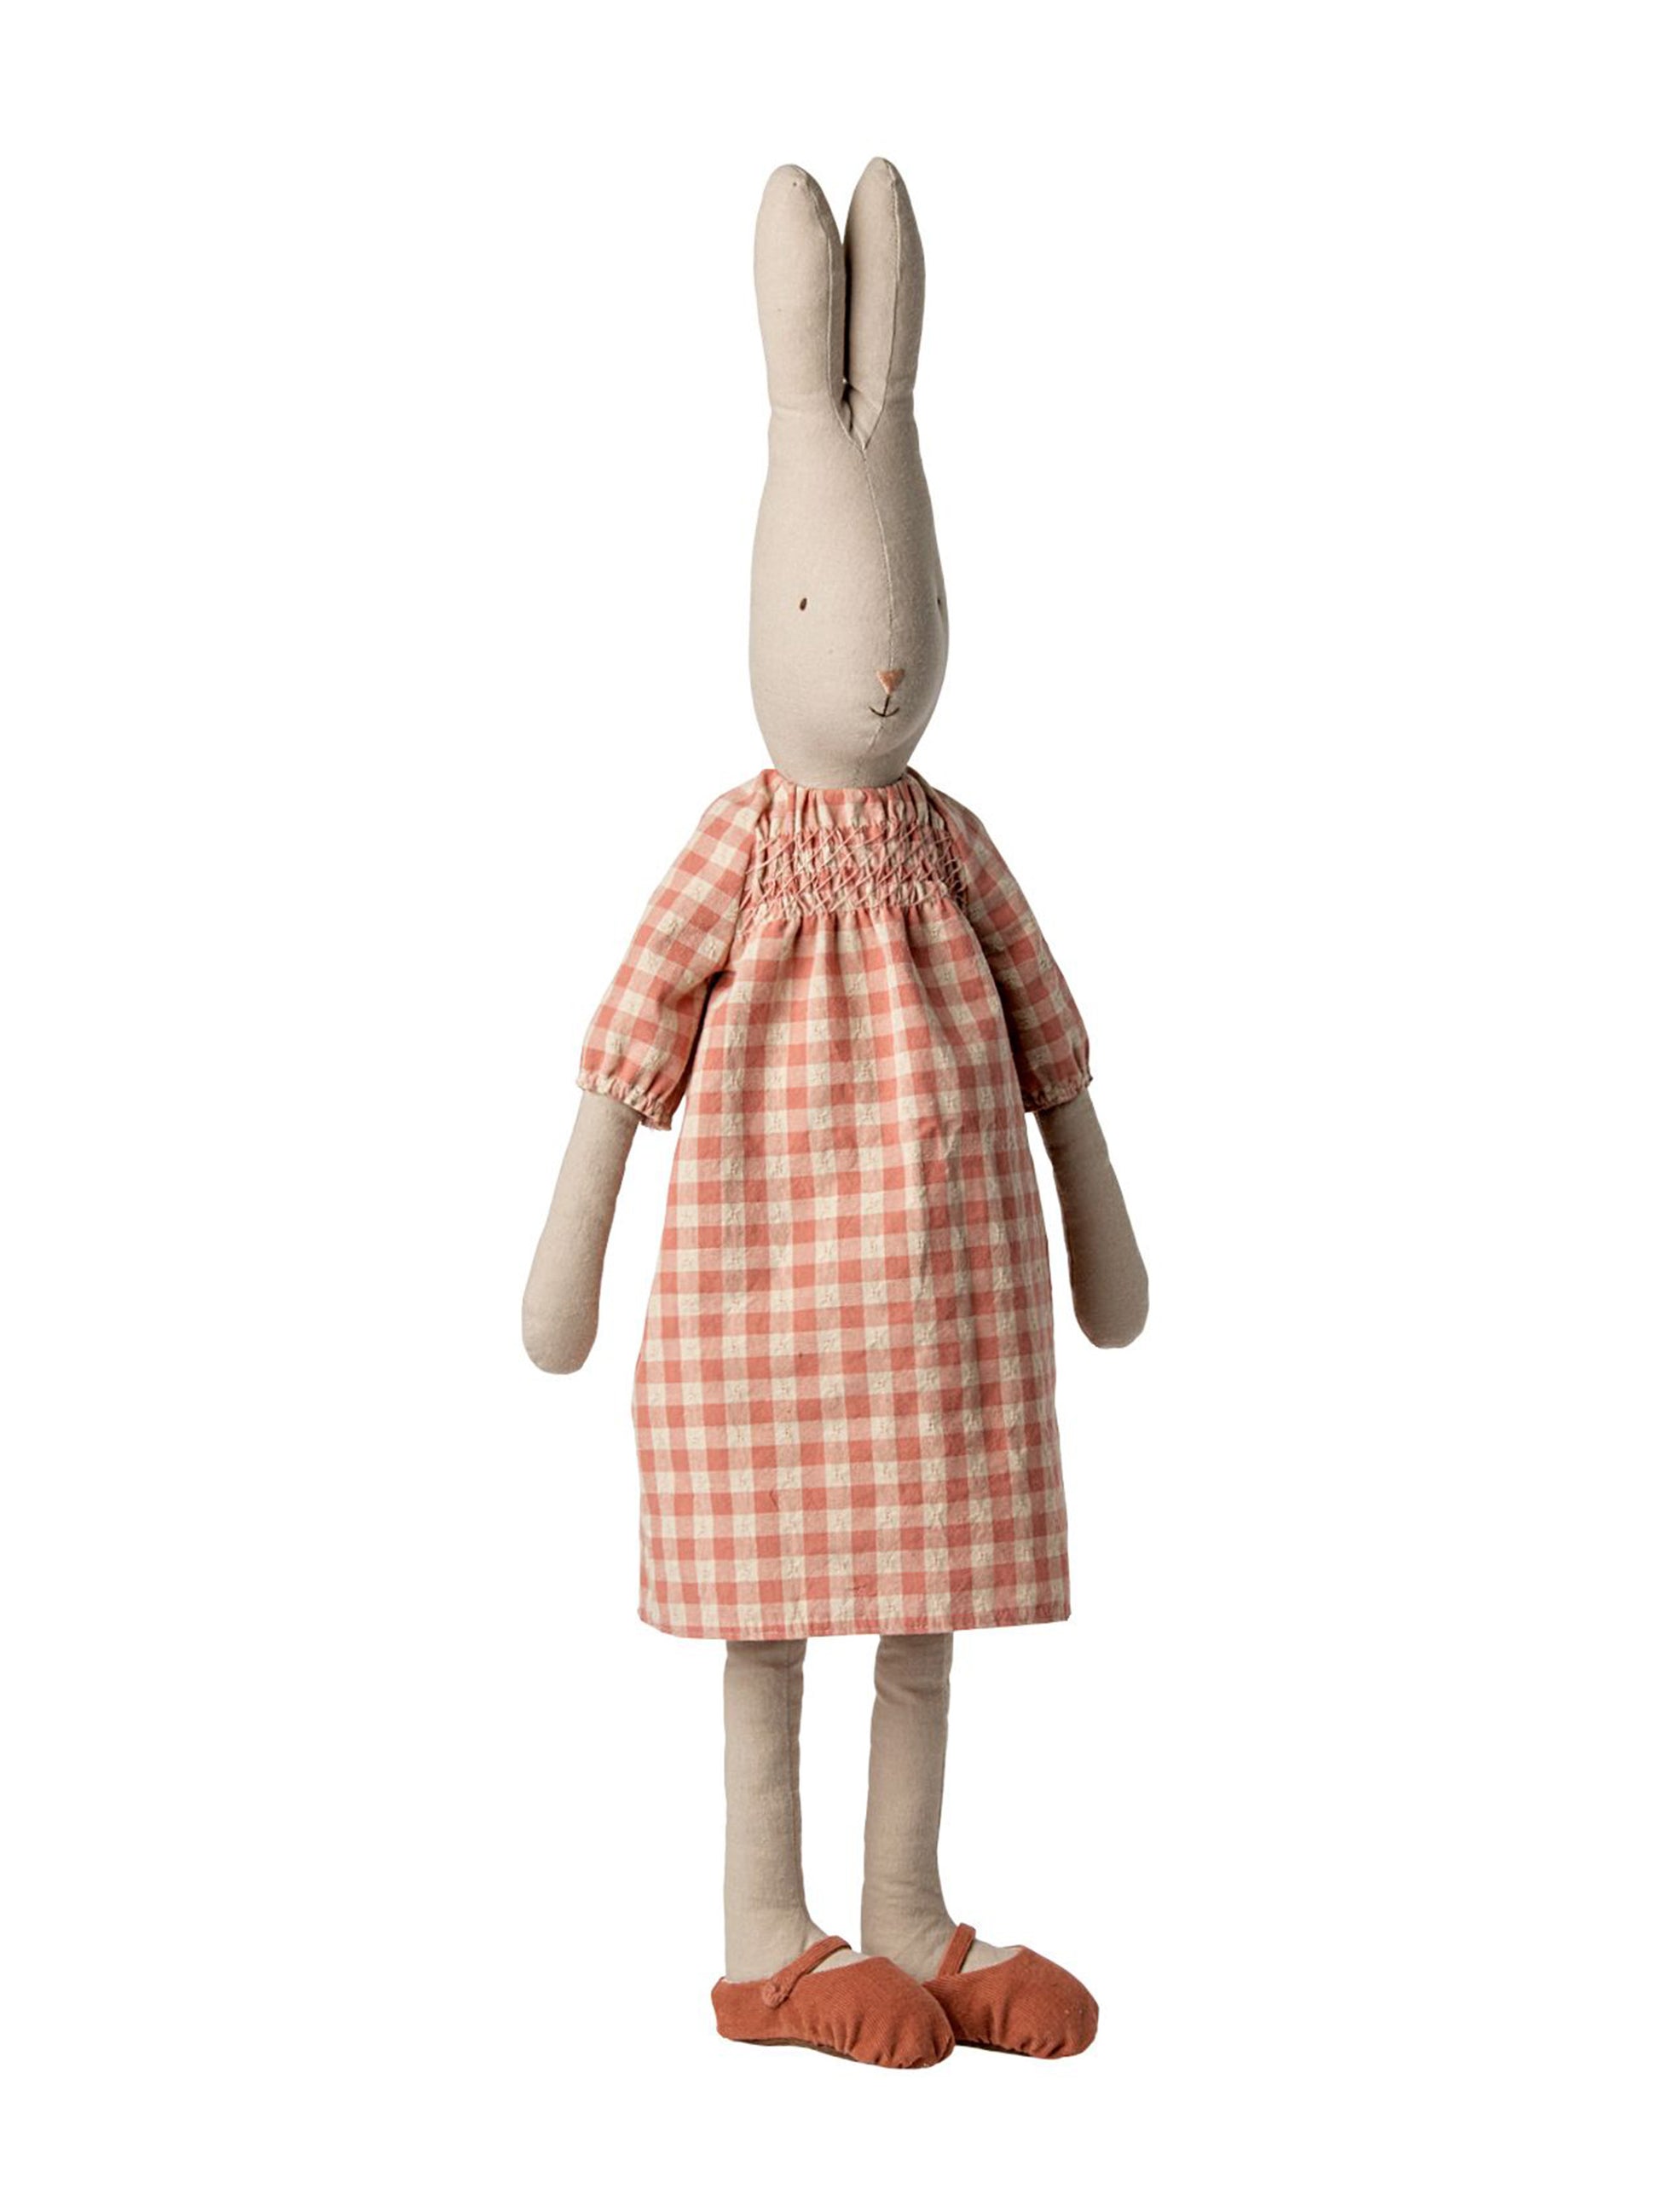 Maileg Rabbit Size 5 with Checkered Dress Weston Table